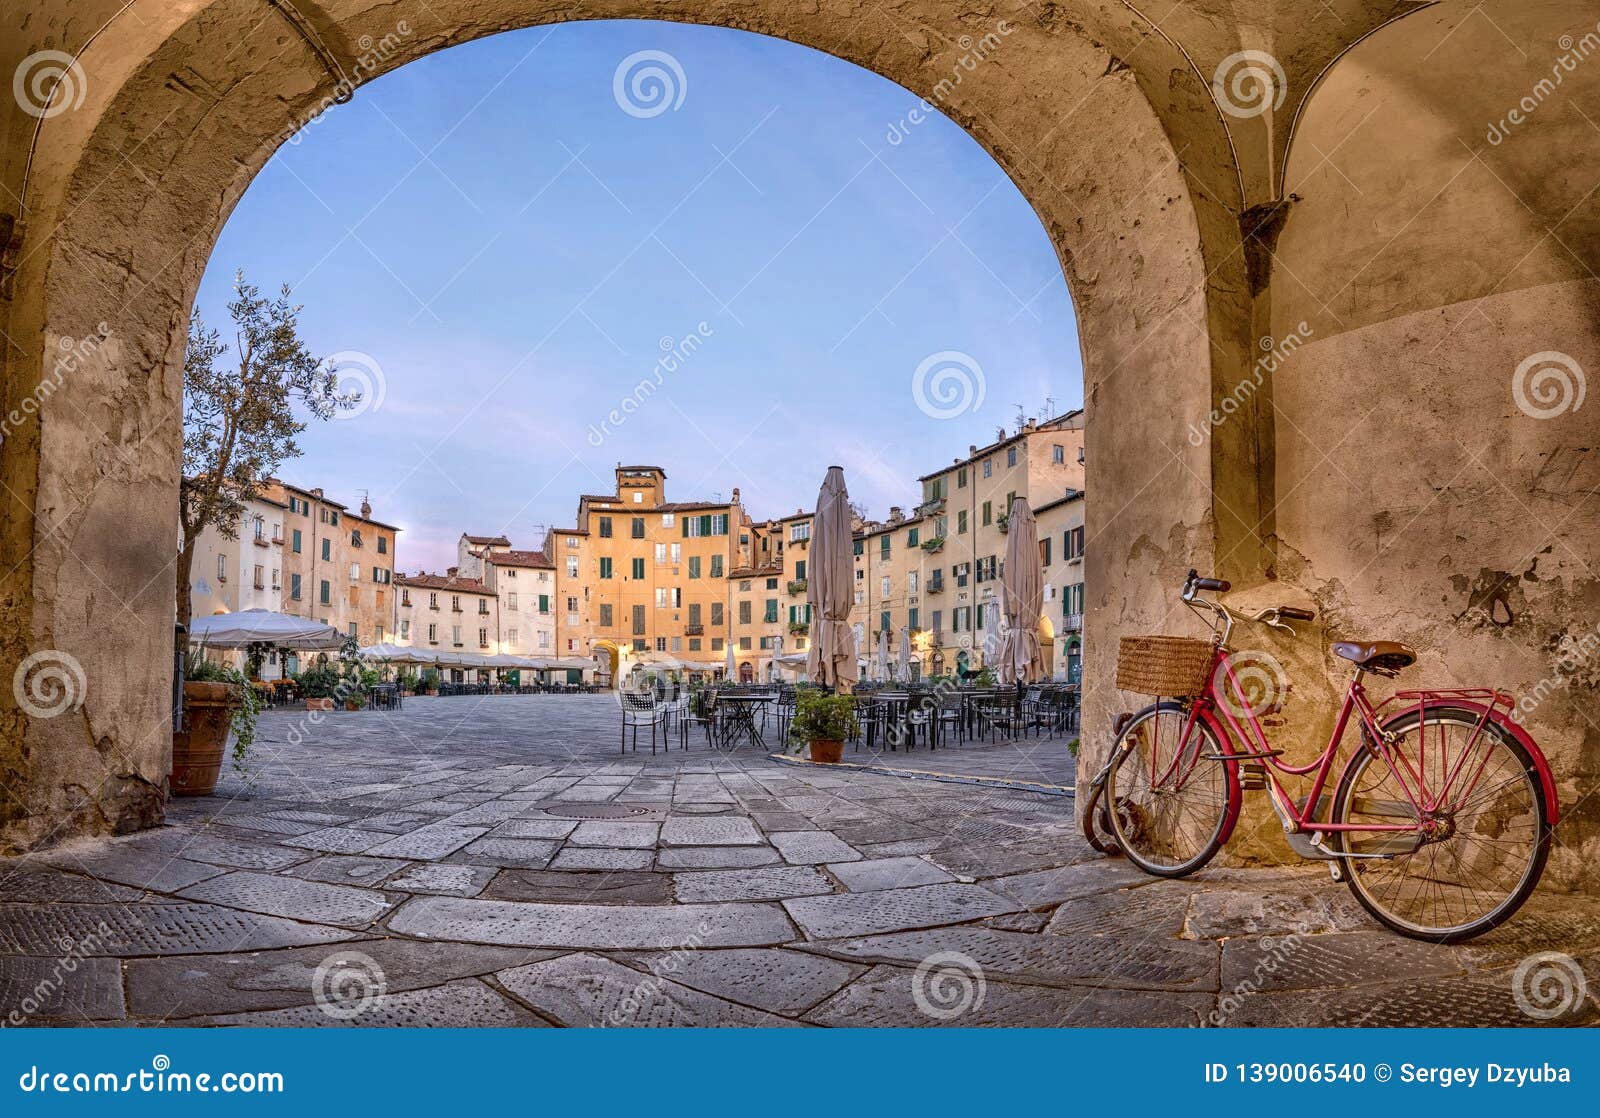 lucca, italy. view of piazza dell`anfiteatro square